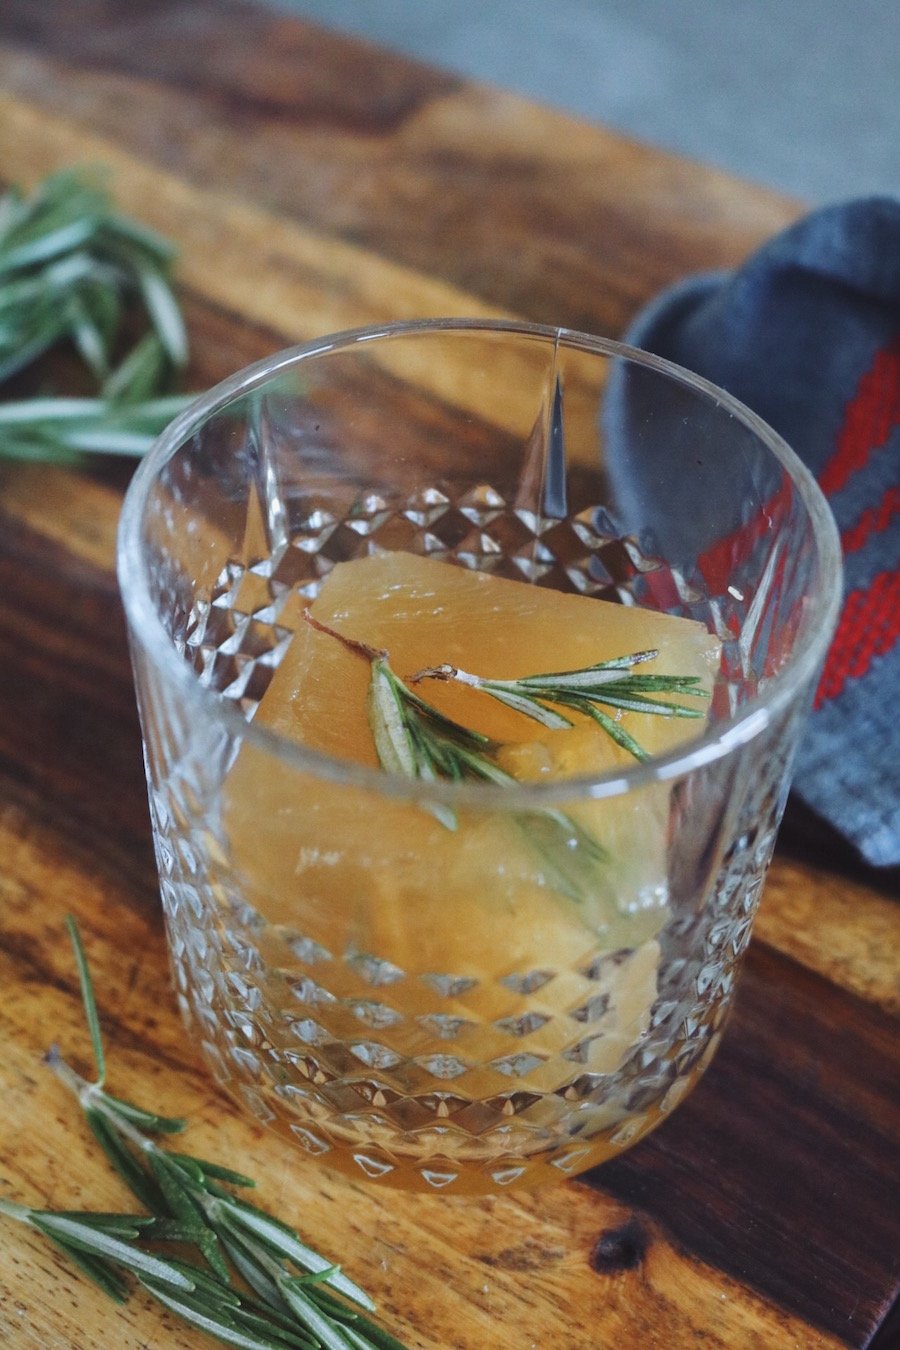 Bone broth ice cubes are the perfect way to get your dose of protein and collagen on warm summer nights. Freeze them plain or add some herbs. 